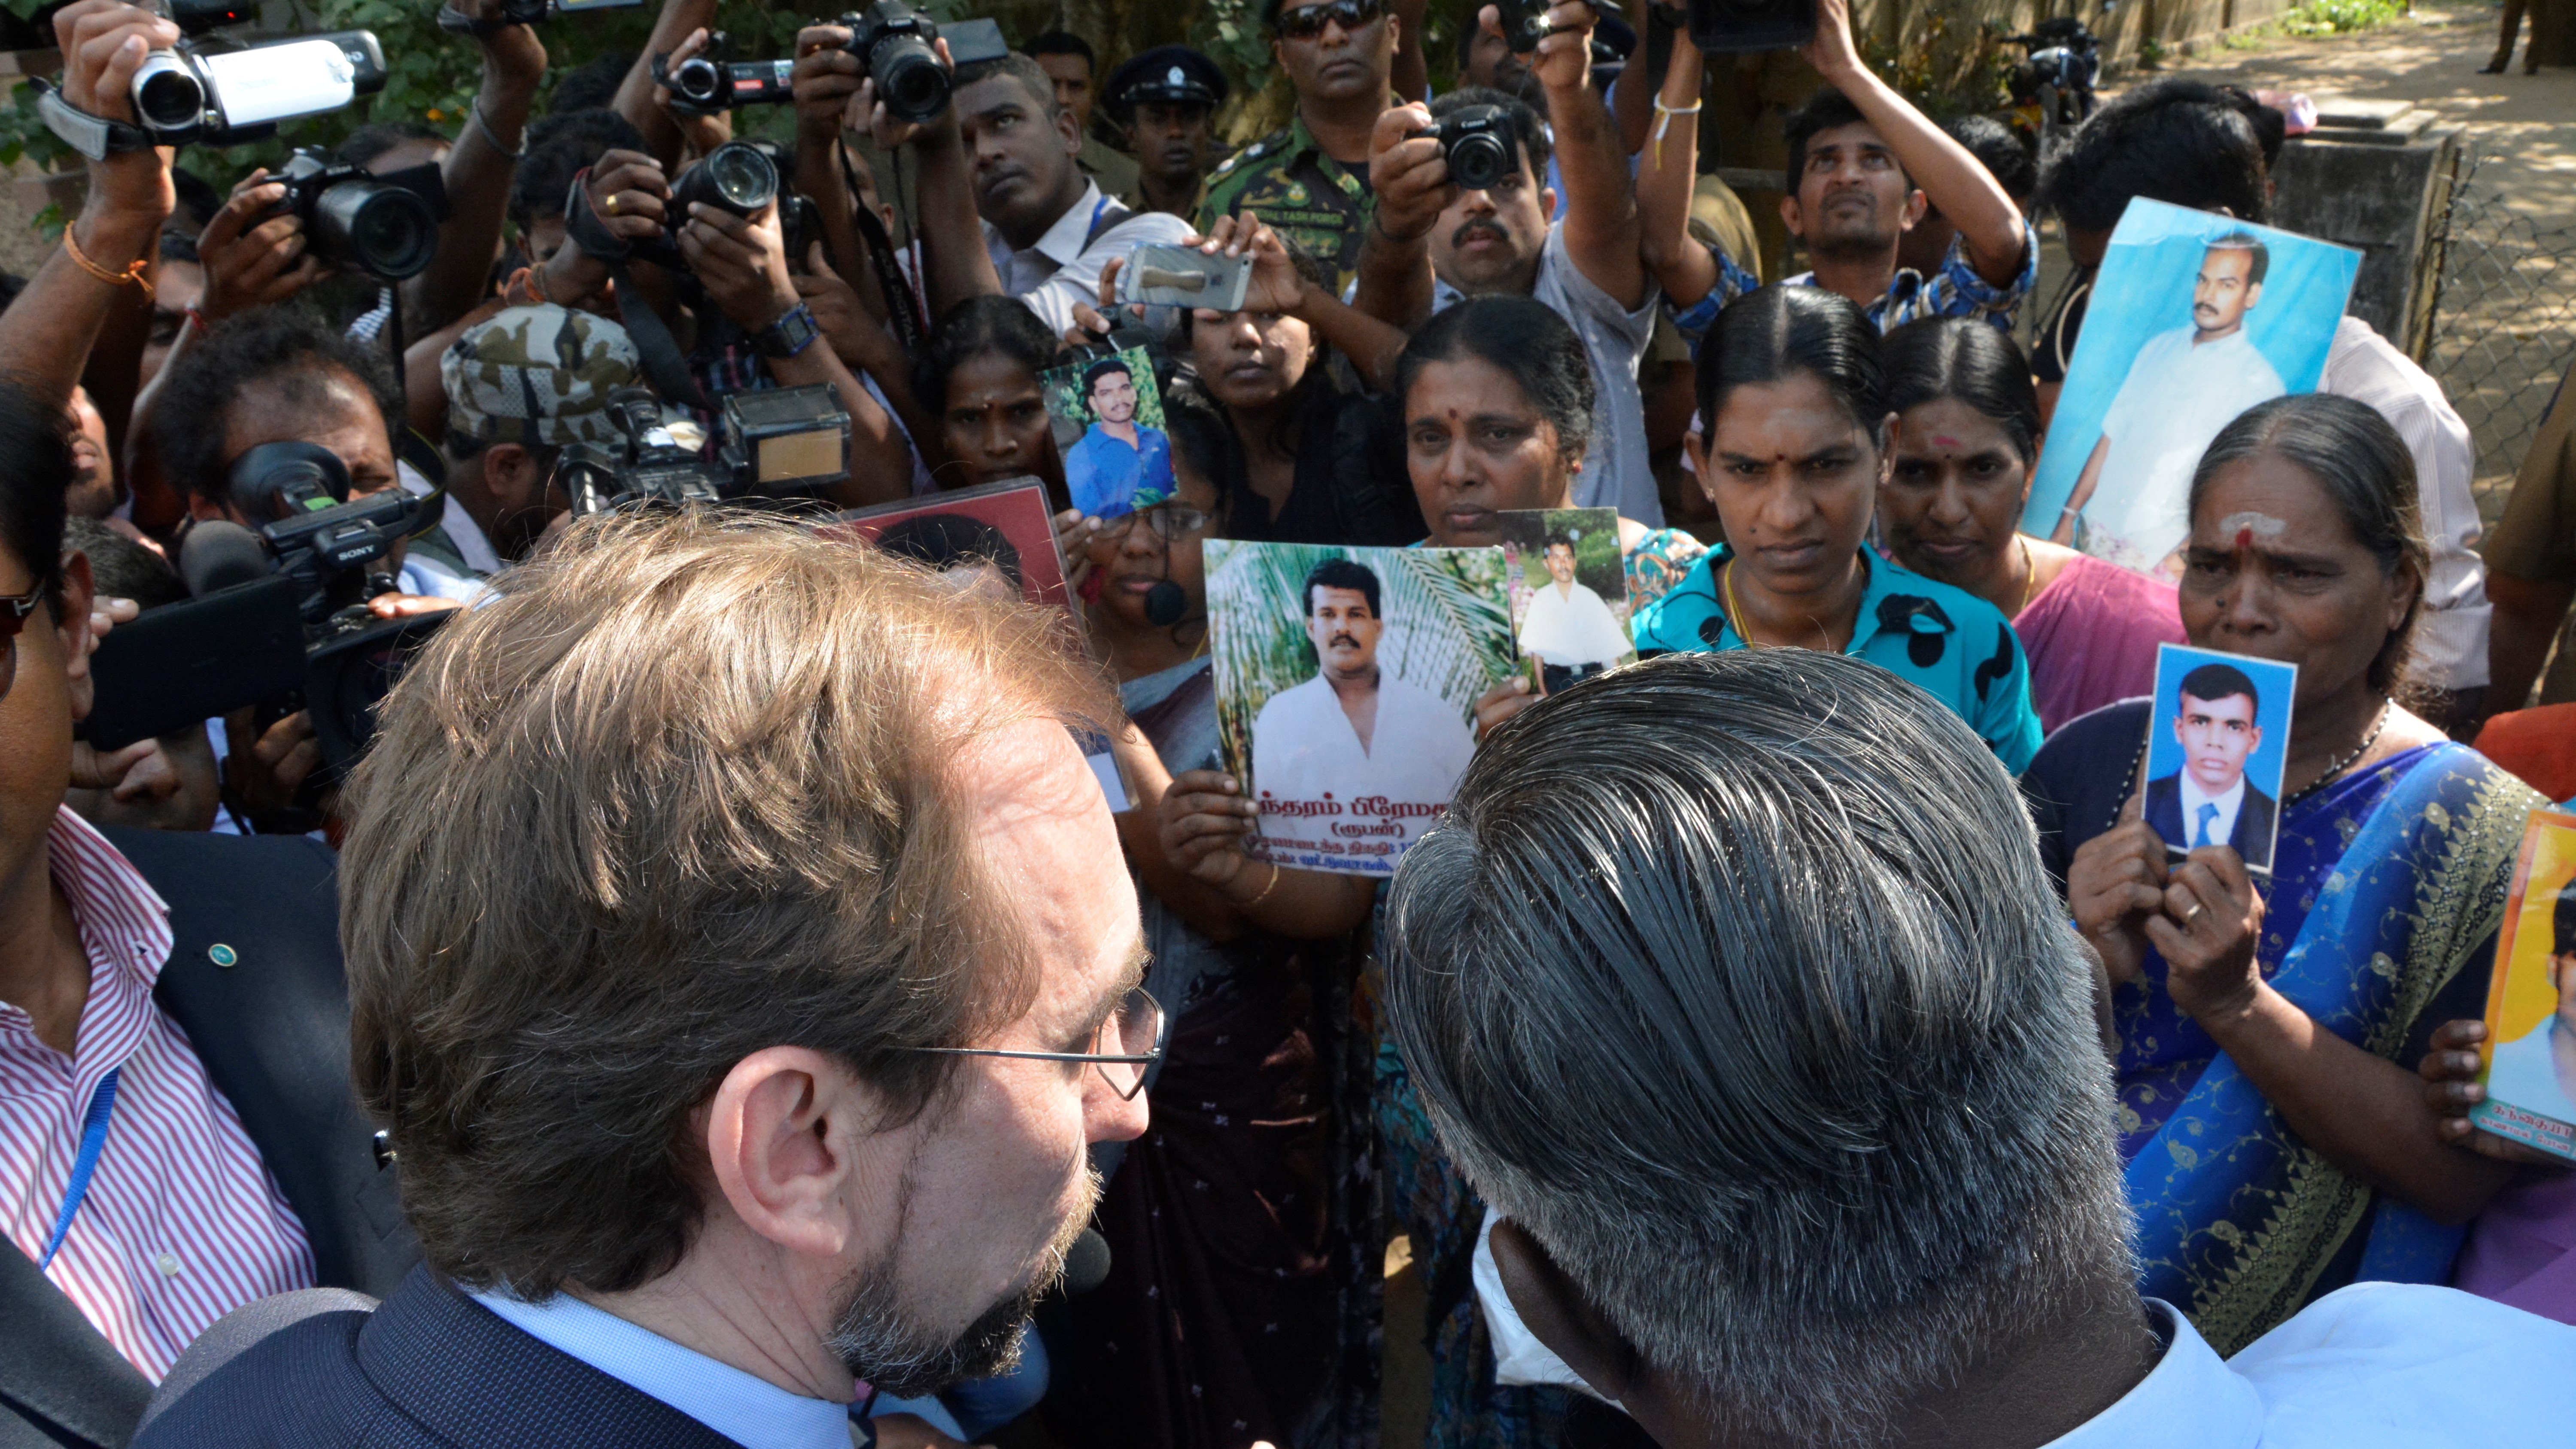 Photo of two men speaking to crowd of solemn people, some holding photos of loved ones